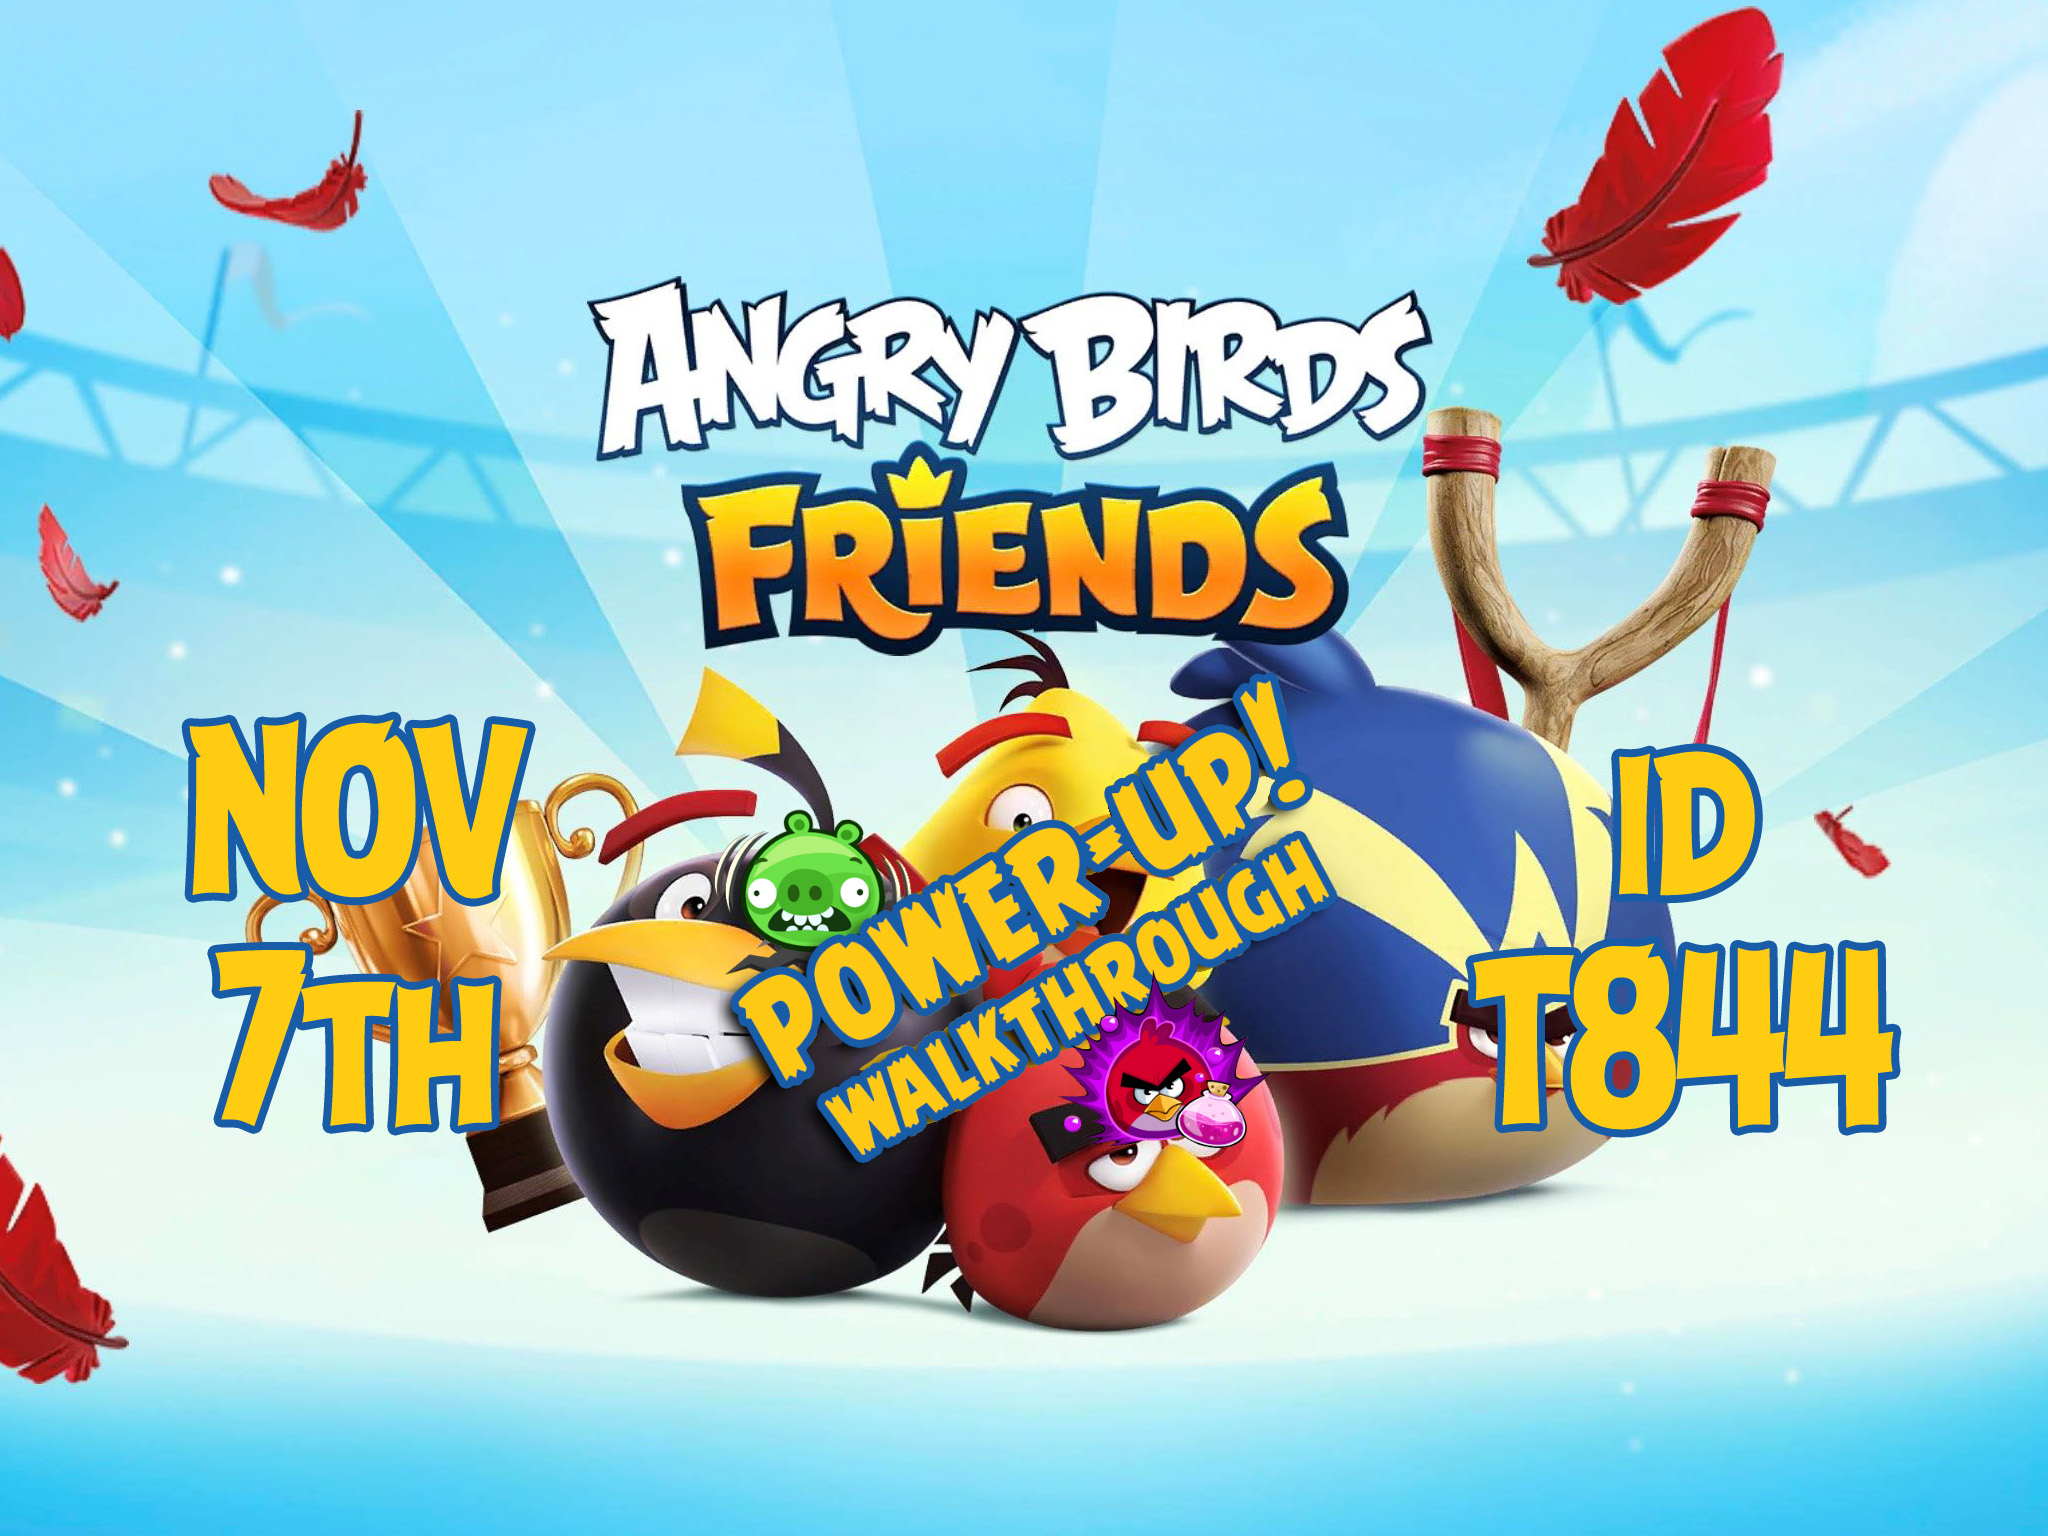 Angry-Birds-Friends-Tournament-T844-Feature-Image-PU